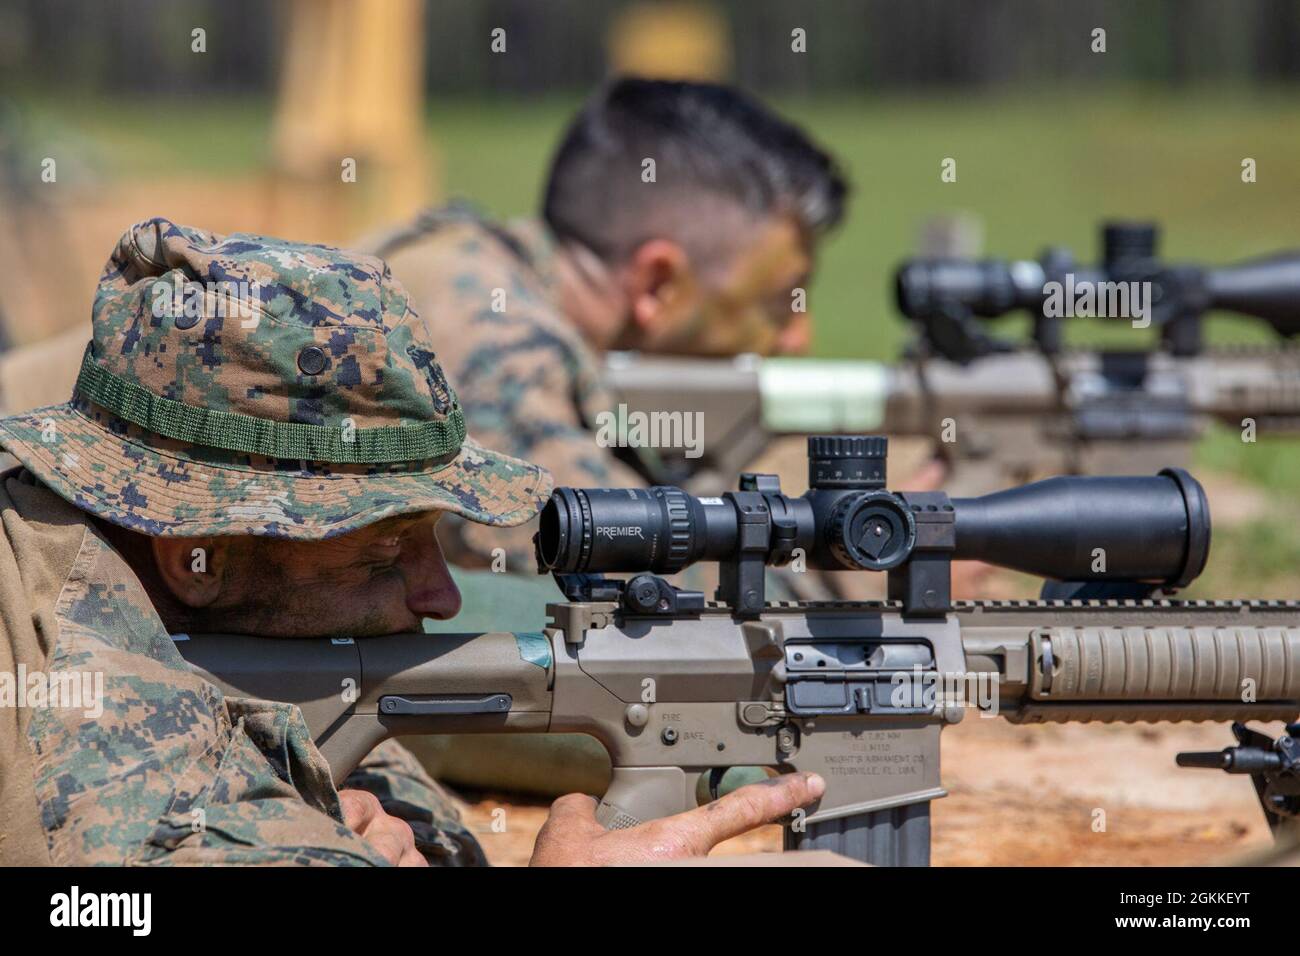 Marines with 3rd Force Reconnaissance Company, 4th Marine Division, prepare to fire at their targets during sniper training at Camp Shelby, Mississippi, on May 16, 2021. Marines train with the M110 semi-automatic sniper system, an anti-personnel and light material rifle that fires 7.62 mm ammunition, to maintain proficiency in long-range marksmanship. Stock Photo